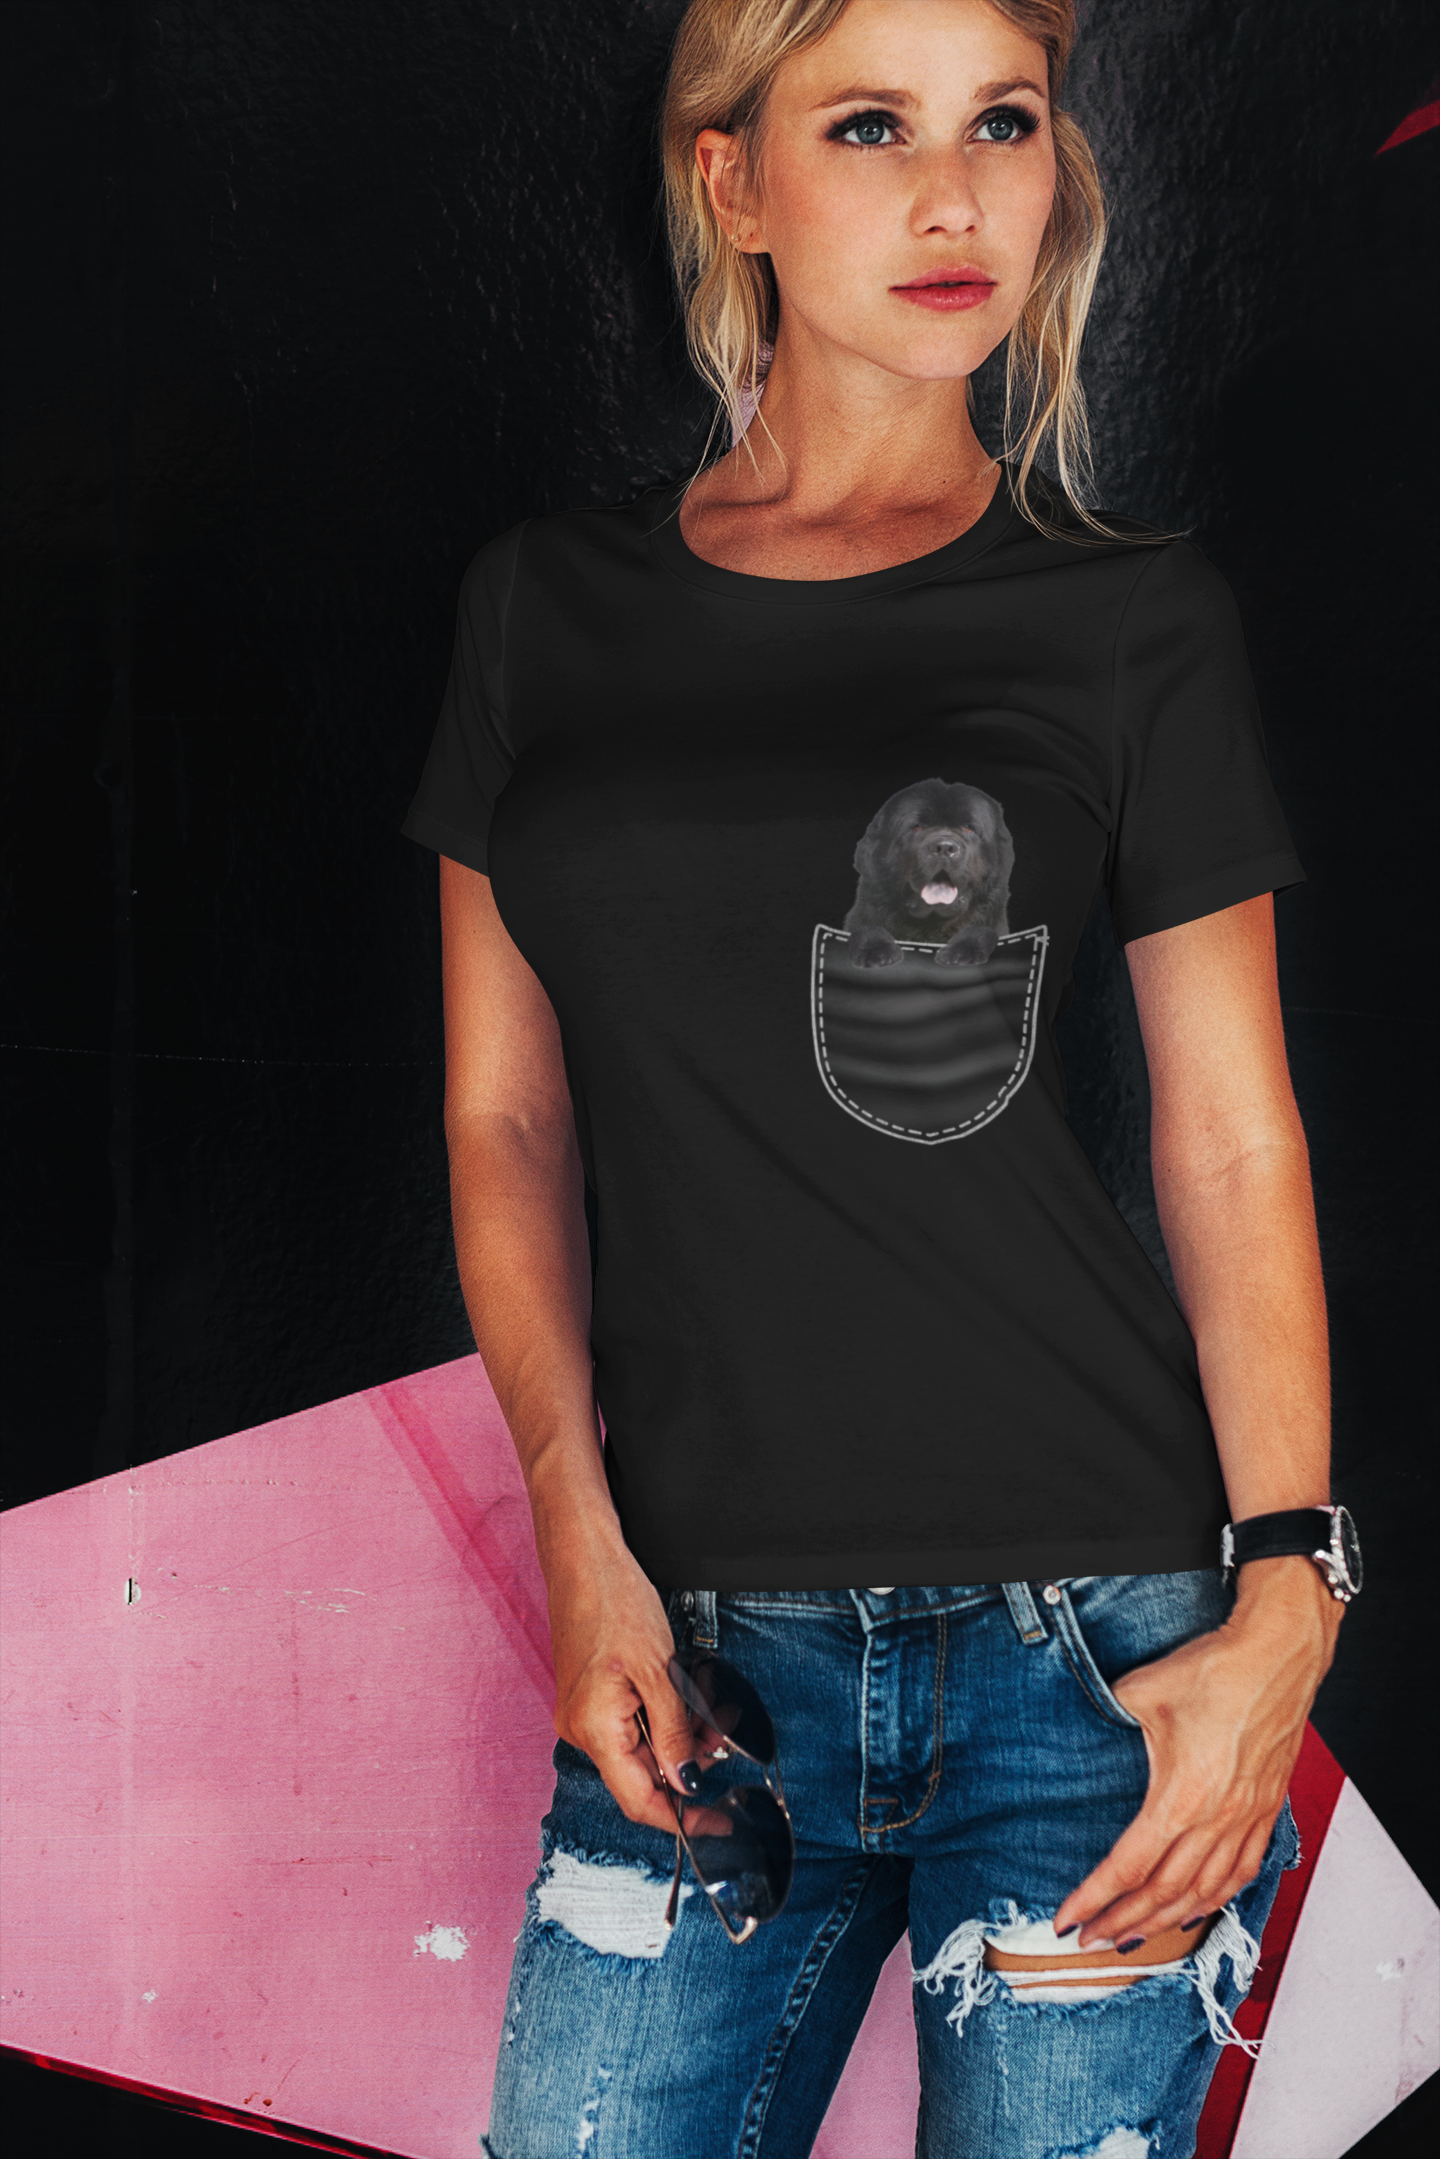 ULTRABASIC Graphic Women's T-Shirt Newfoundland - Cute Dog In Your Pocket